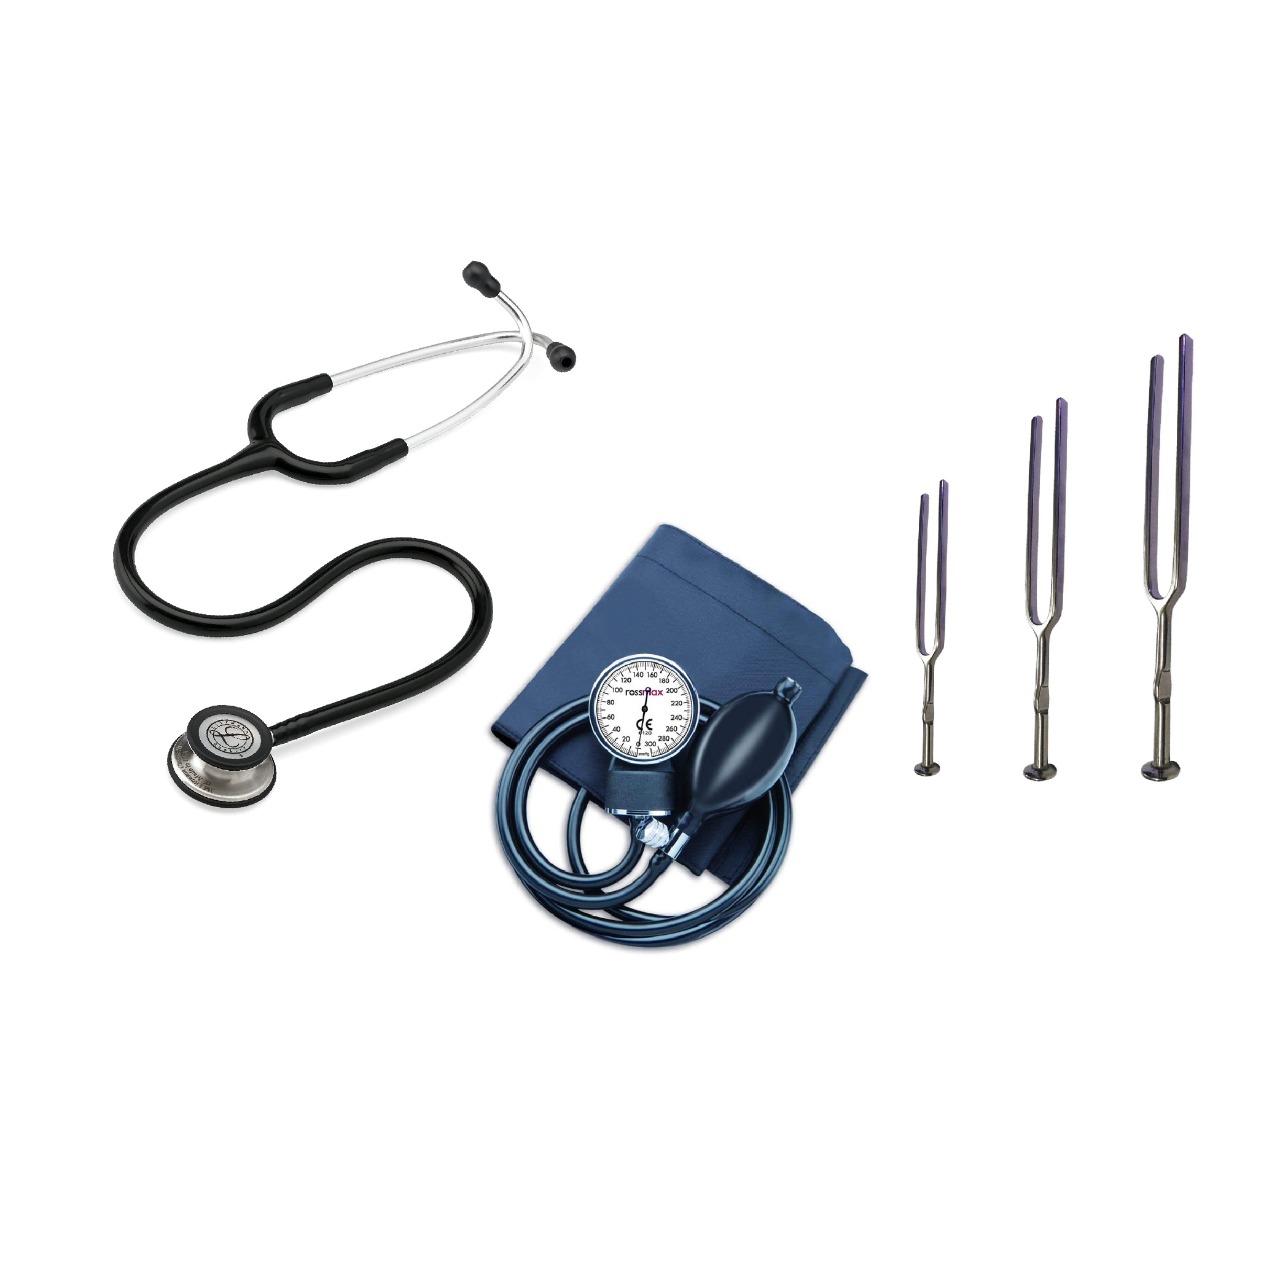  stethoscope aneroid bp apparatus tuning fork premium combo for medical professionals 